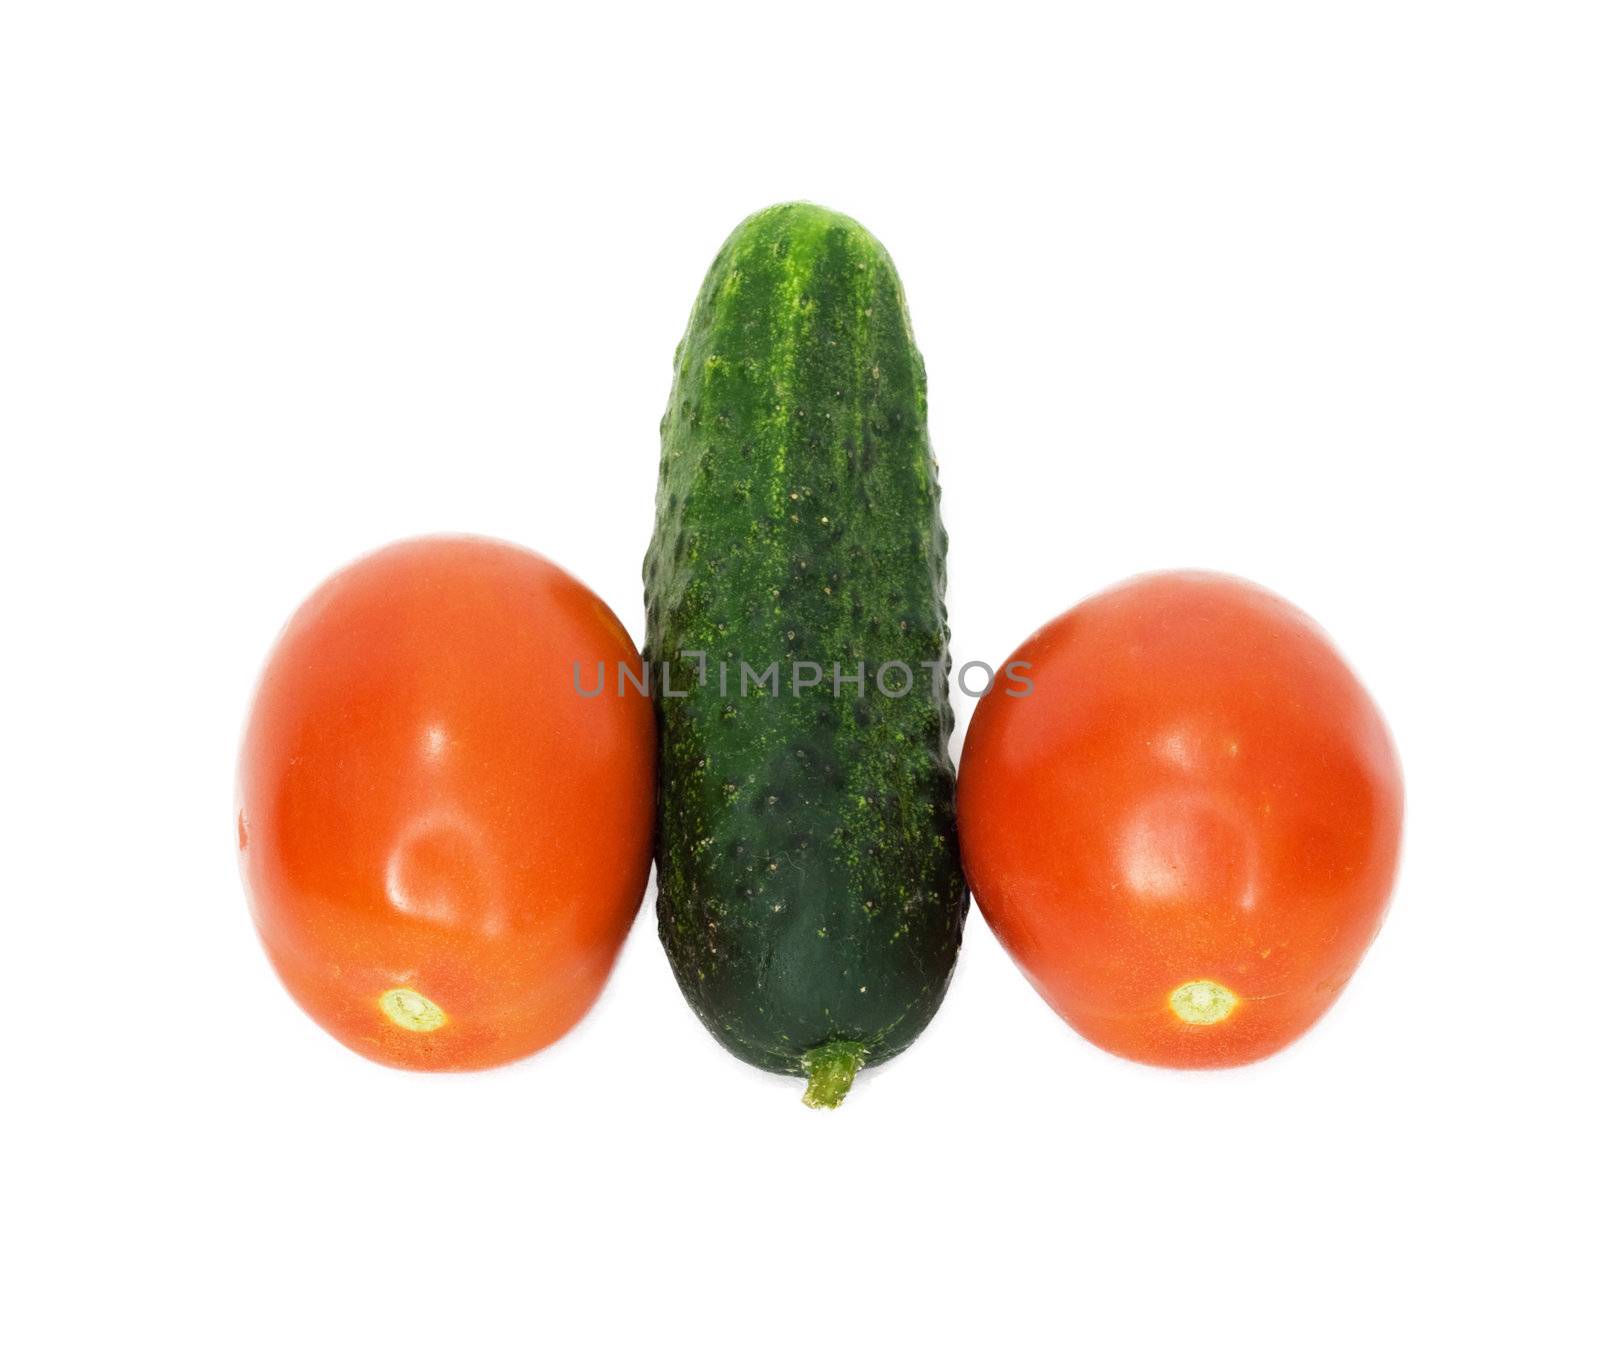 two tomatoes were insulated and one cucumber on white by schankz